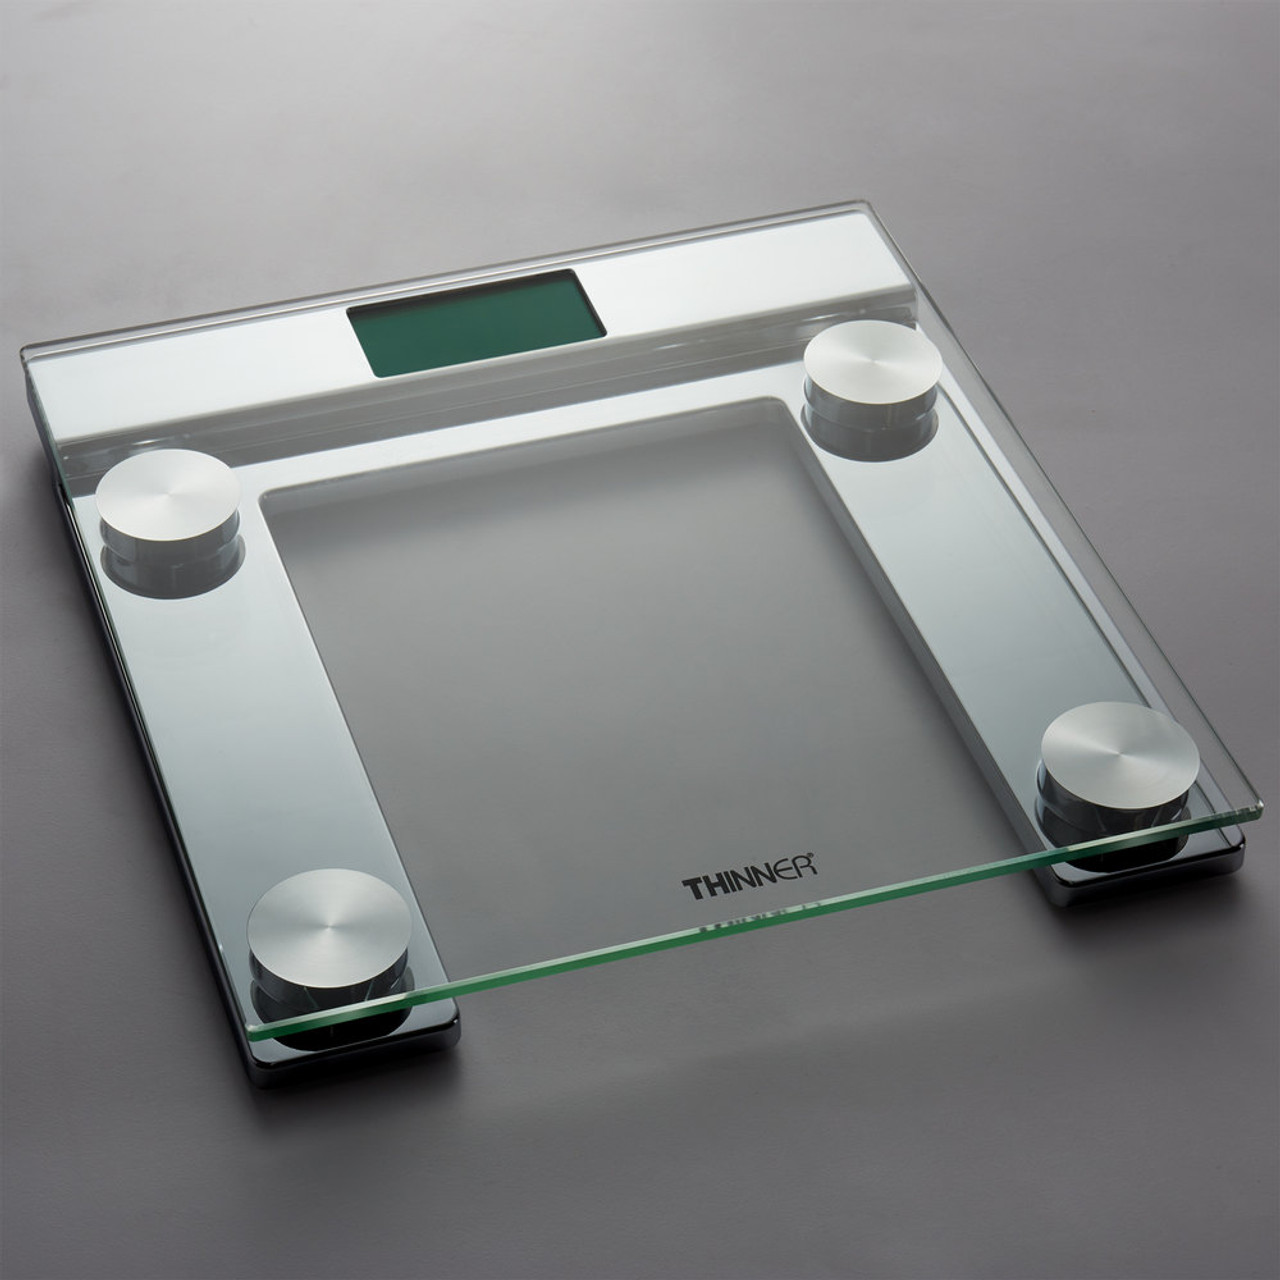 Thinner® Digital Glass Scale, 1.5 Inch Display 400 lb. Capacity